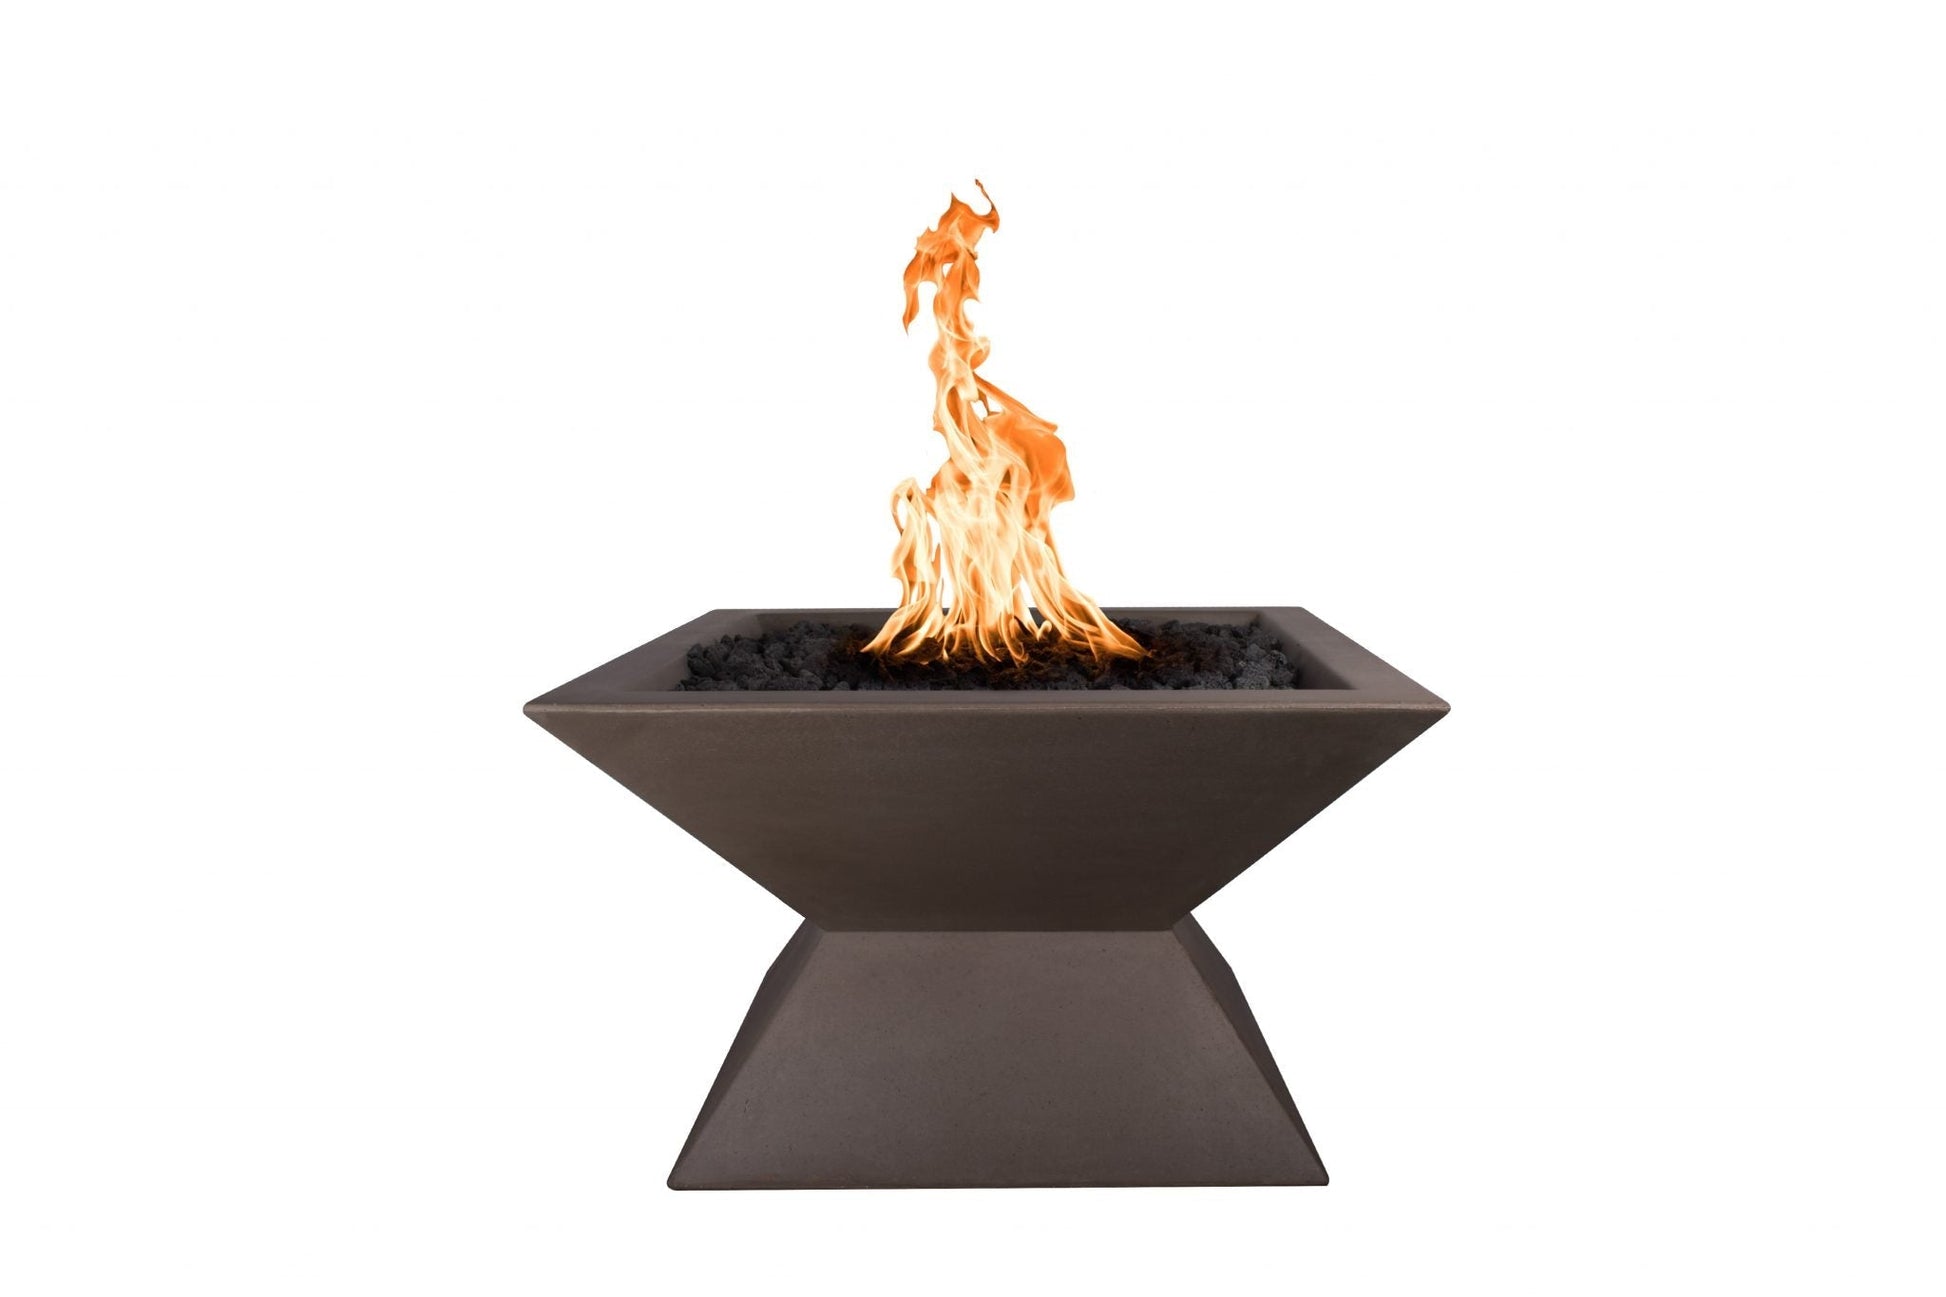 The Outdoor Plus Square Uxmal 30" Ash GFRC Concrete Natural Gas Fire Pit with Match Lit with Flame Sense Ignition